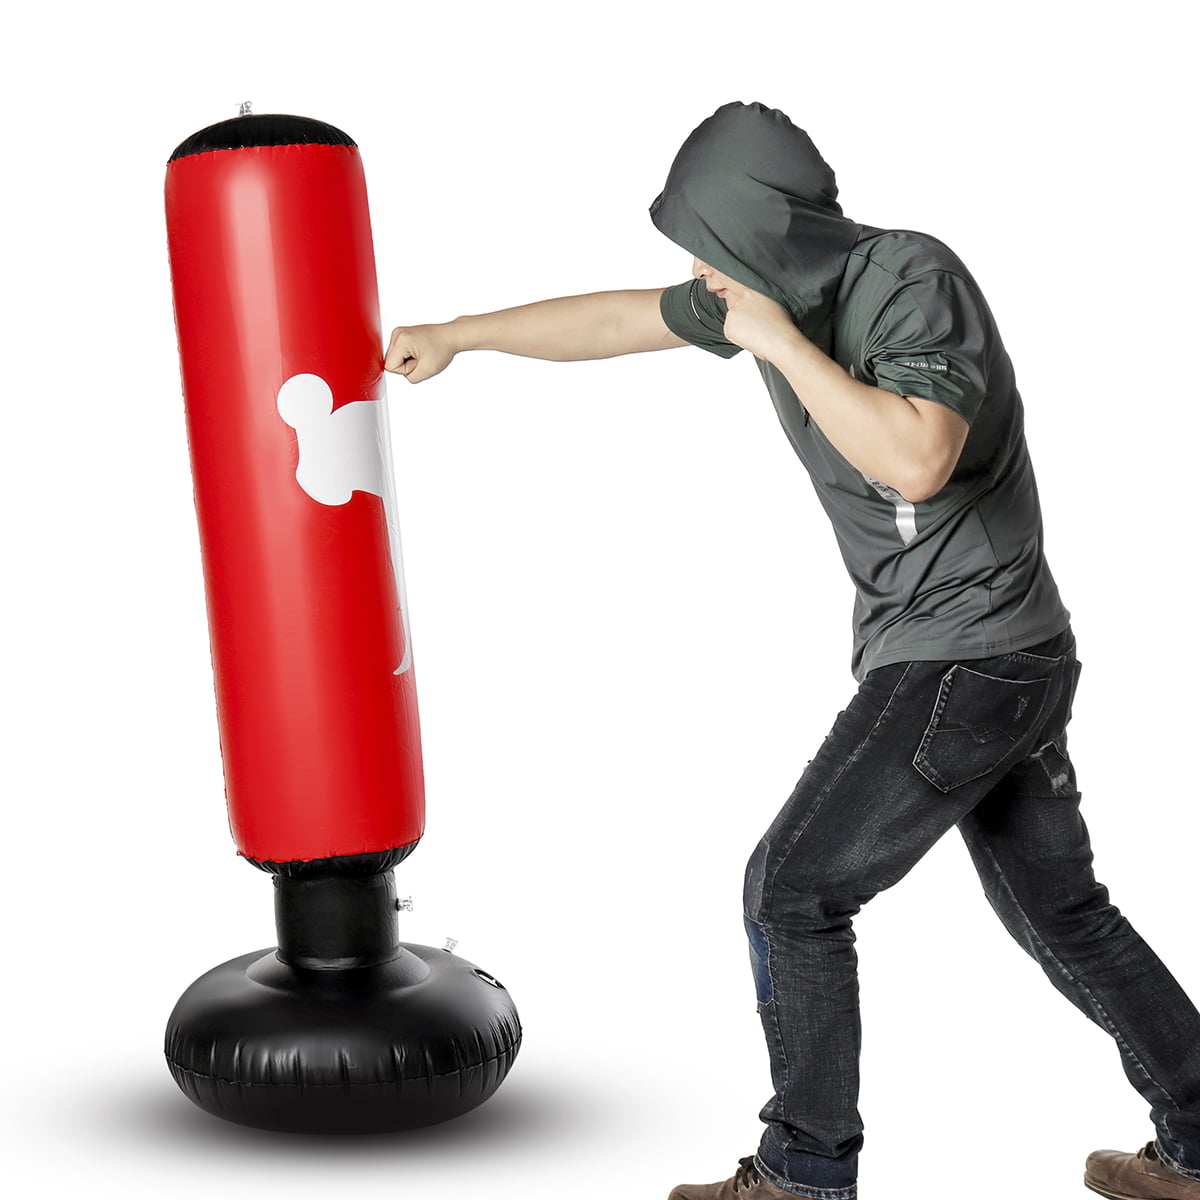 Kids Junior Boxing Punch Bag Set Free Standing Inflatable Boxing Punch Bag 1.6M 